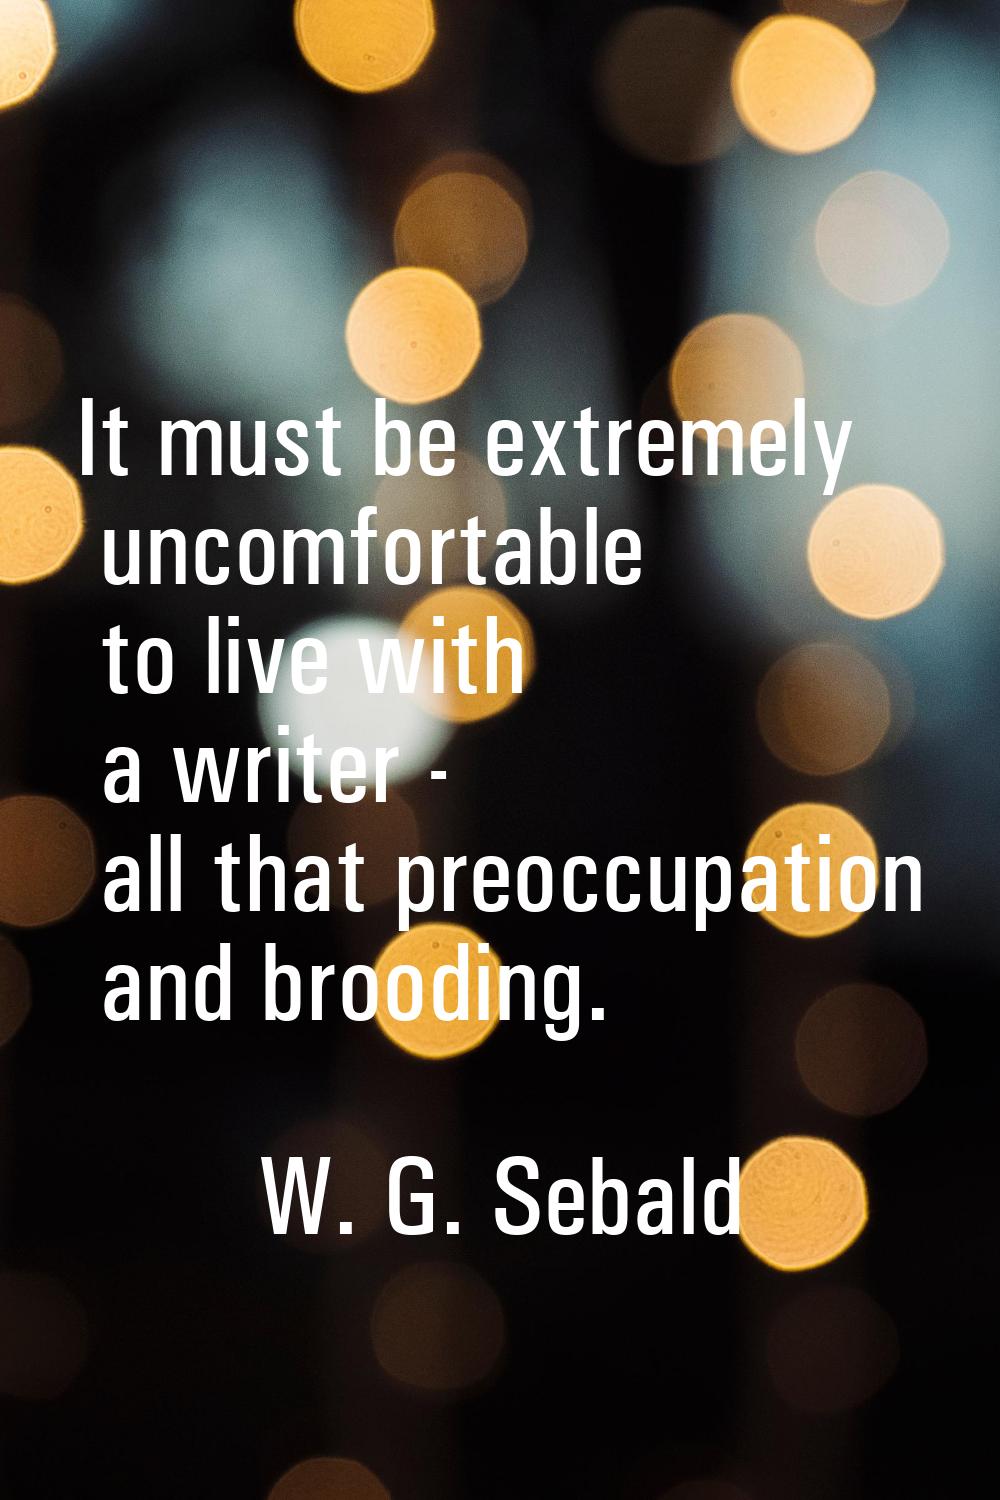 It must be extremely uncomfortable to live with a writer - all that preoccupation and brooding.